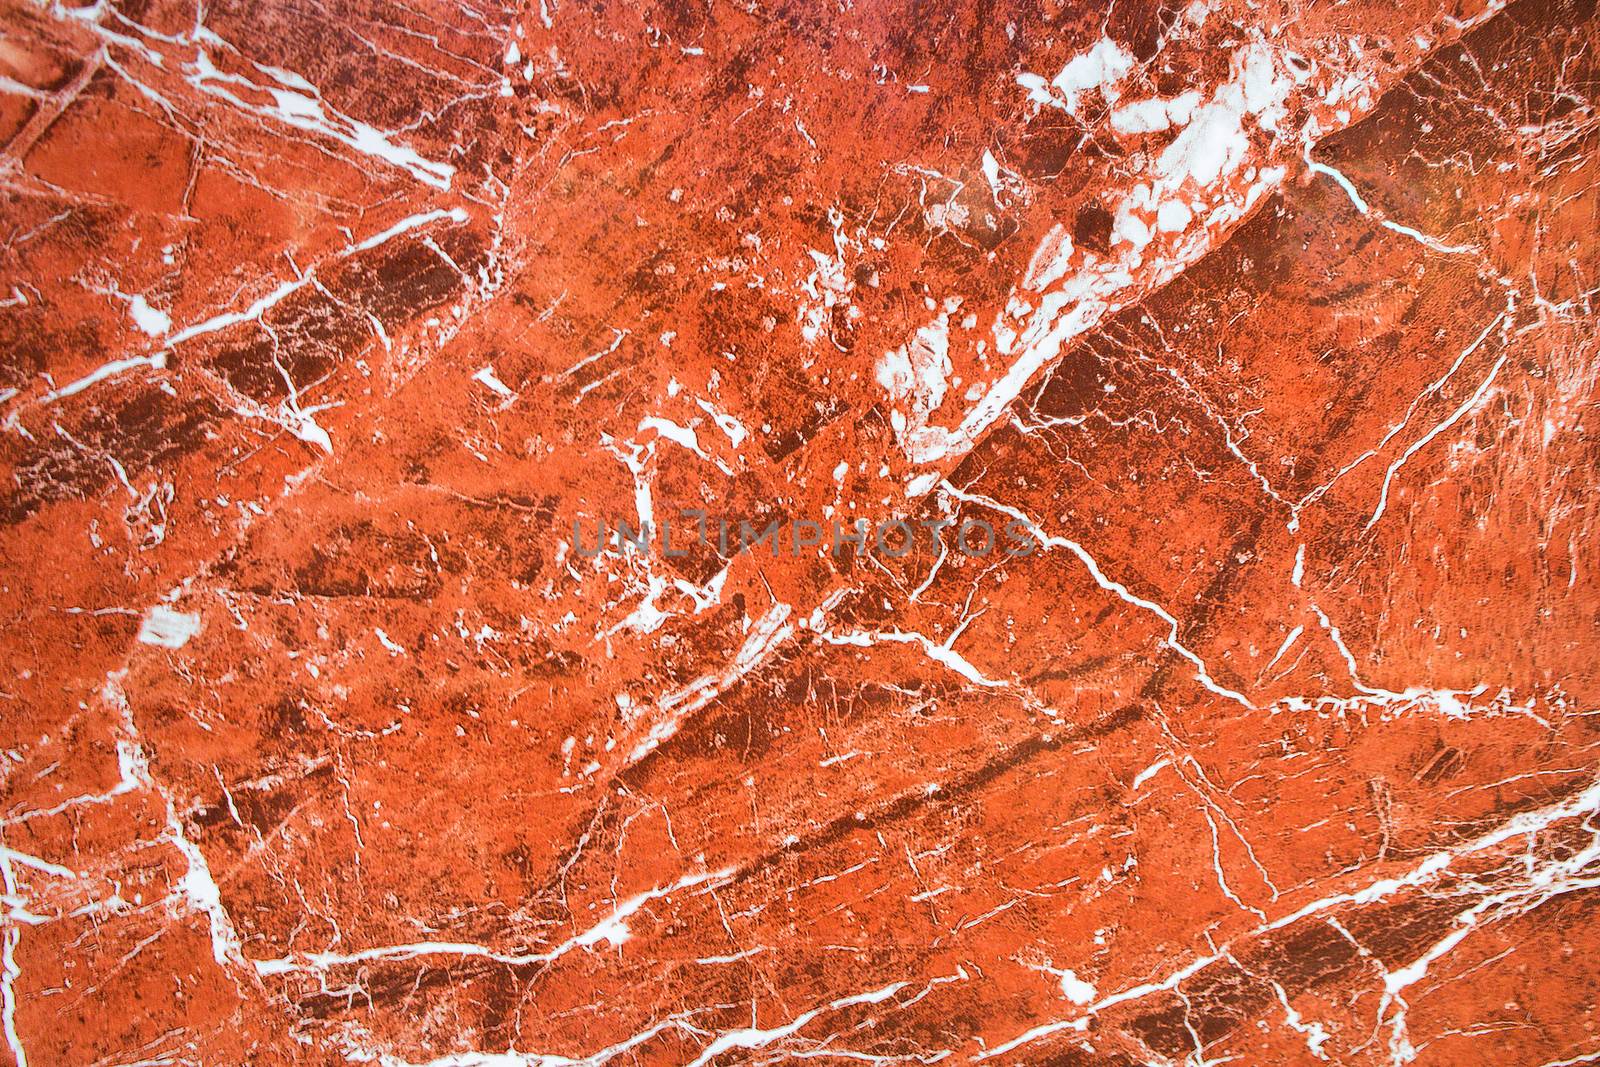 A fiery bewitching sectional view of red granite. by Sergii